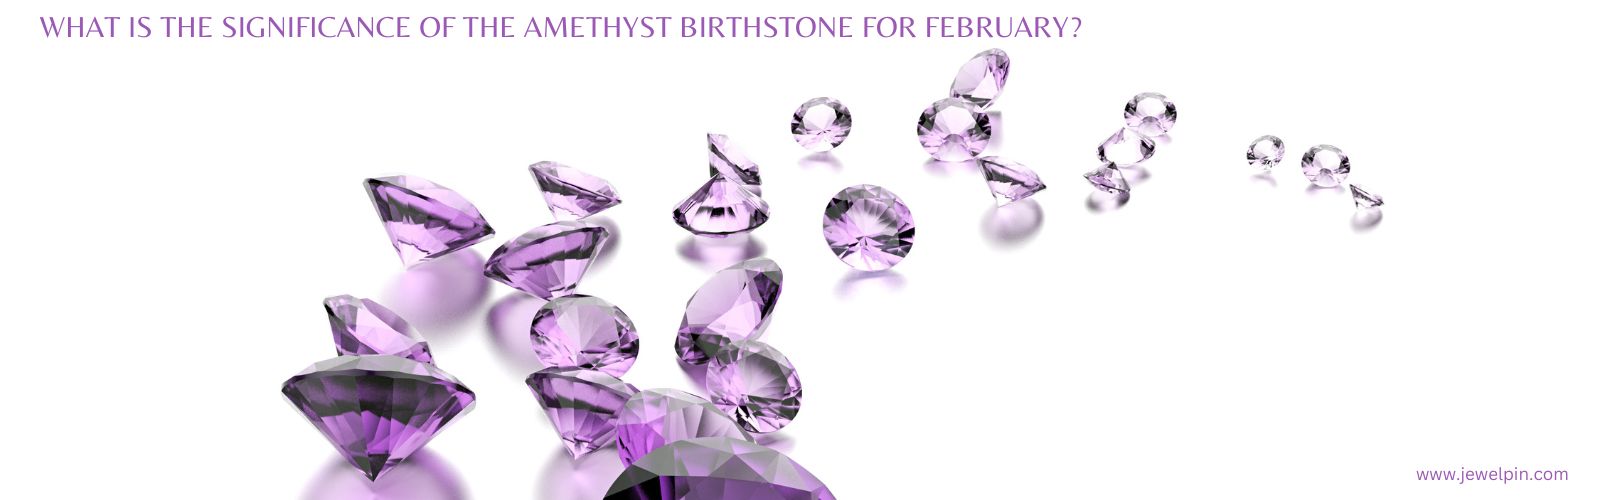 what is the significance of the amethyst birthstone for february